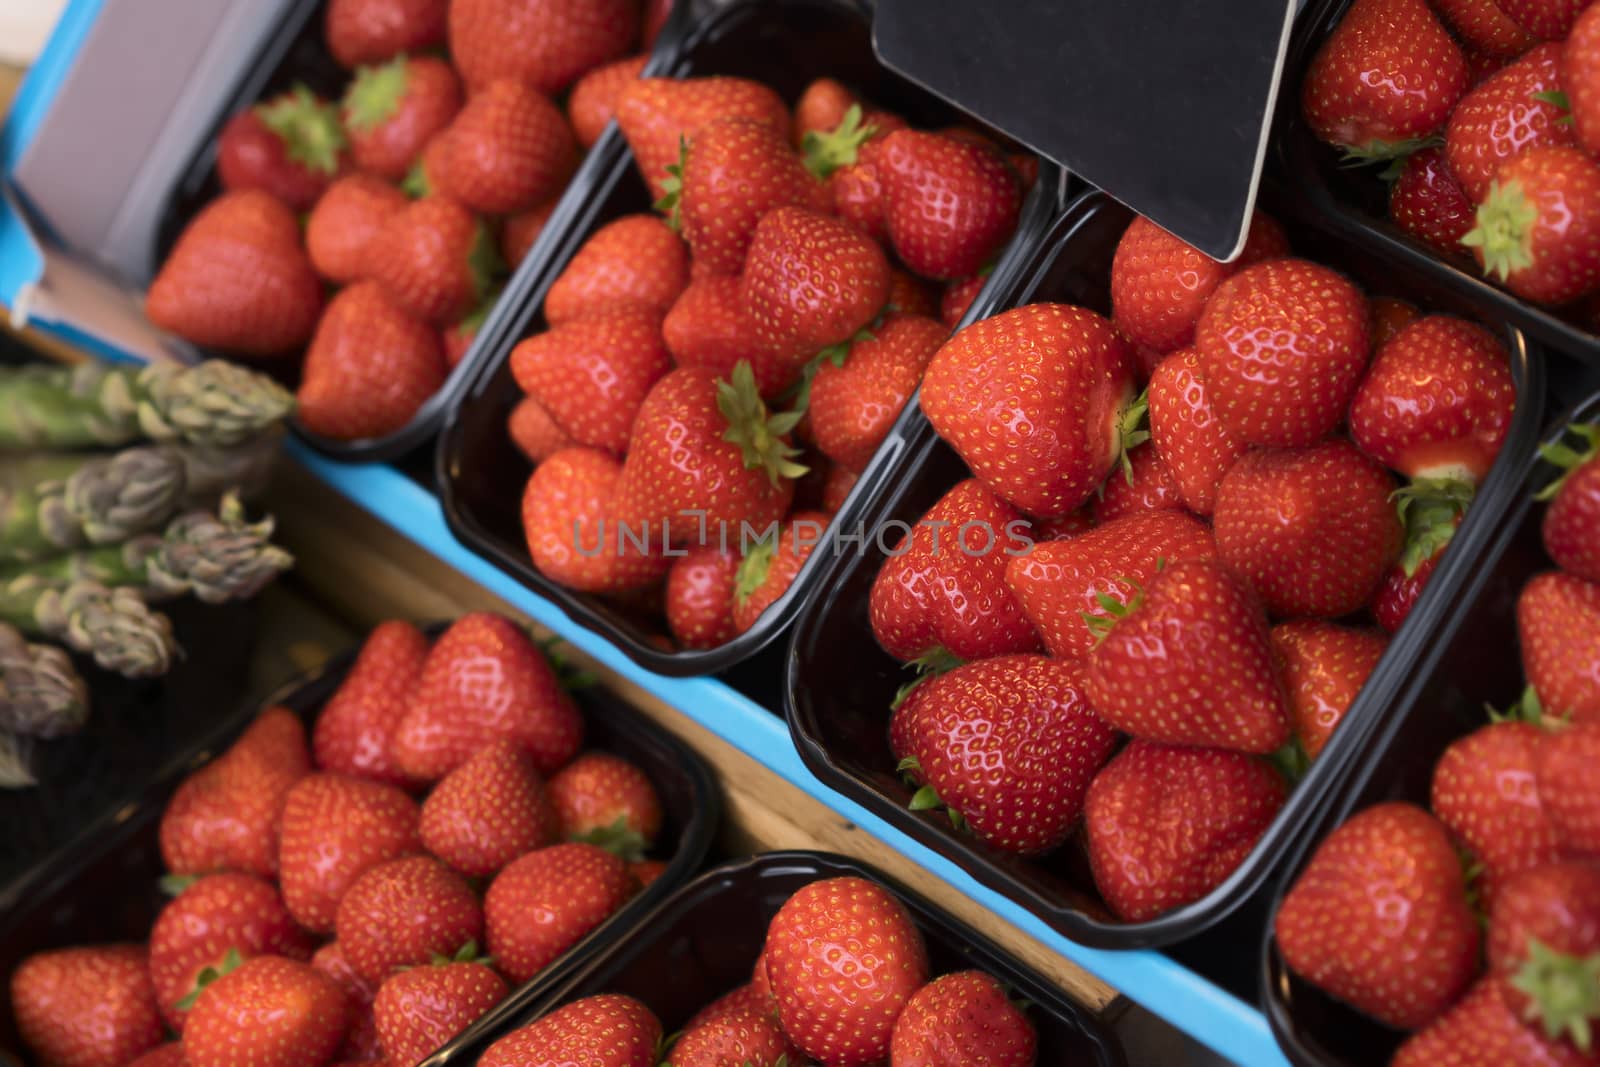 Fresh red strawberries on market stand for sale by sherj